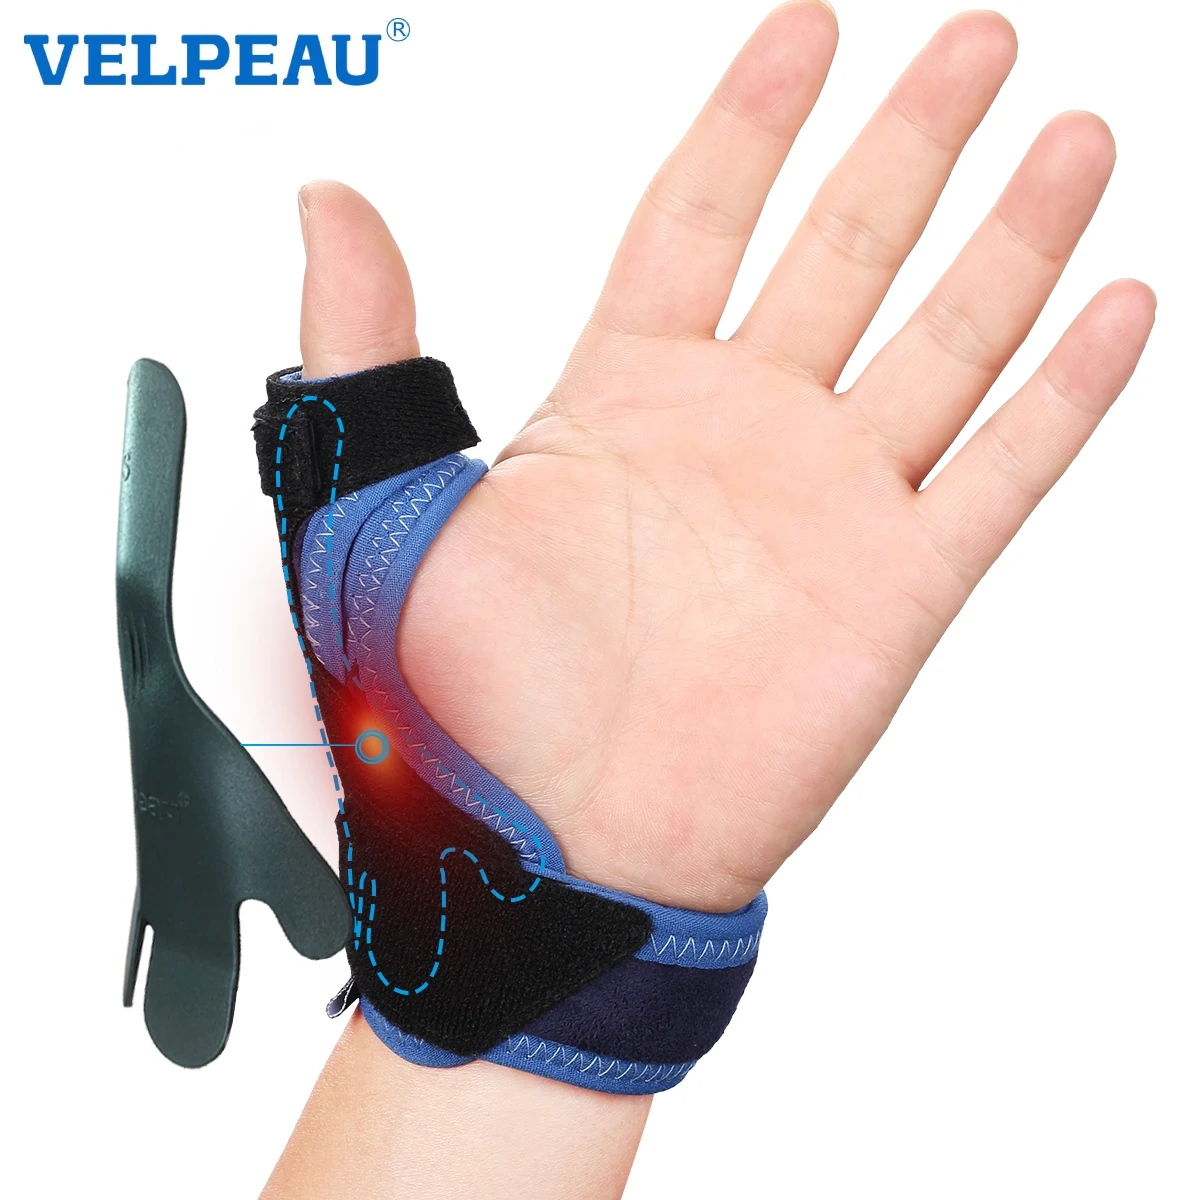 VELPEAU Thumb Splint with Wrist Support Thumb Brace for Tenosynovitis Pain Relief Octopus-Shaped Plate Fits The Thumb Universal